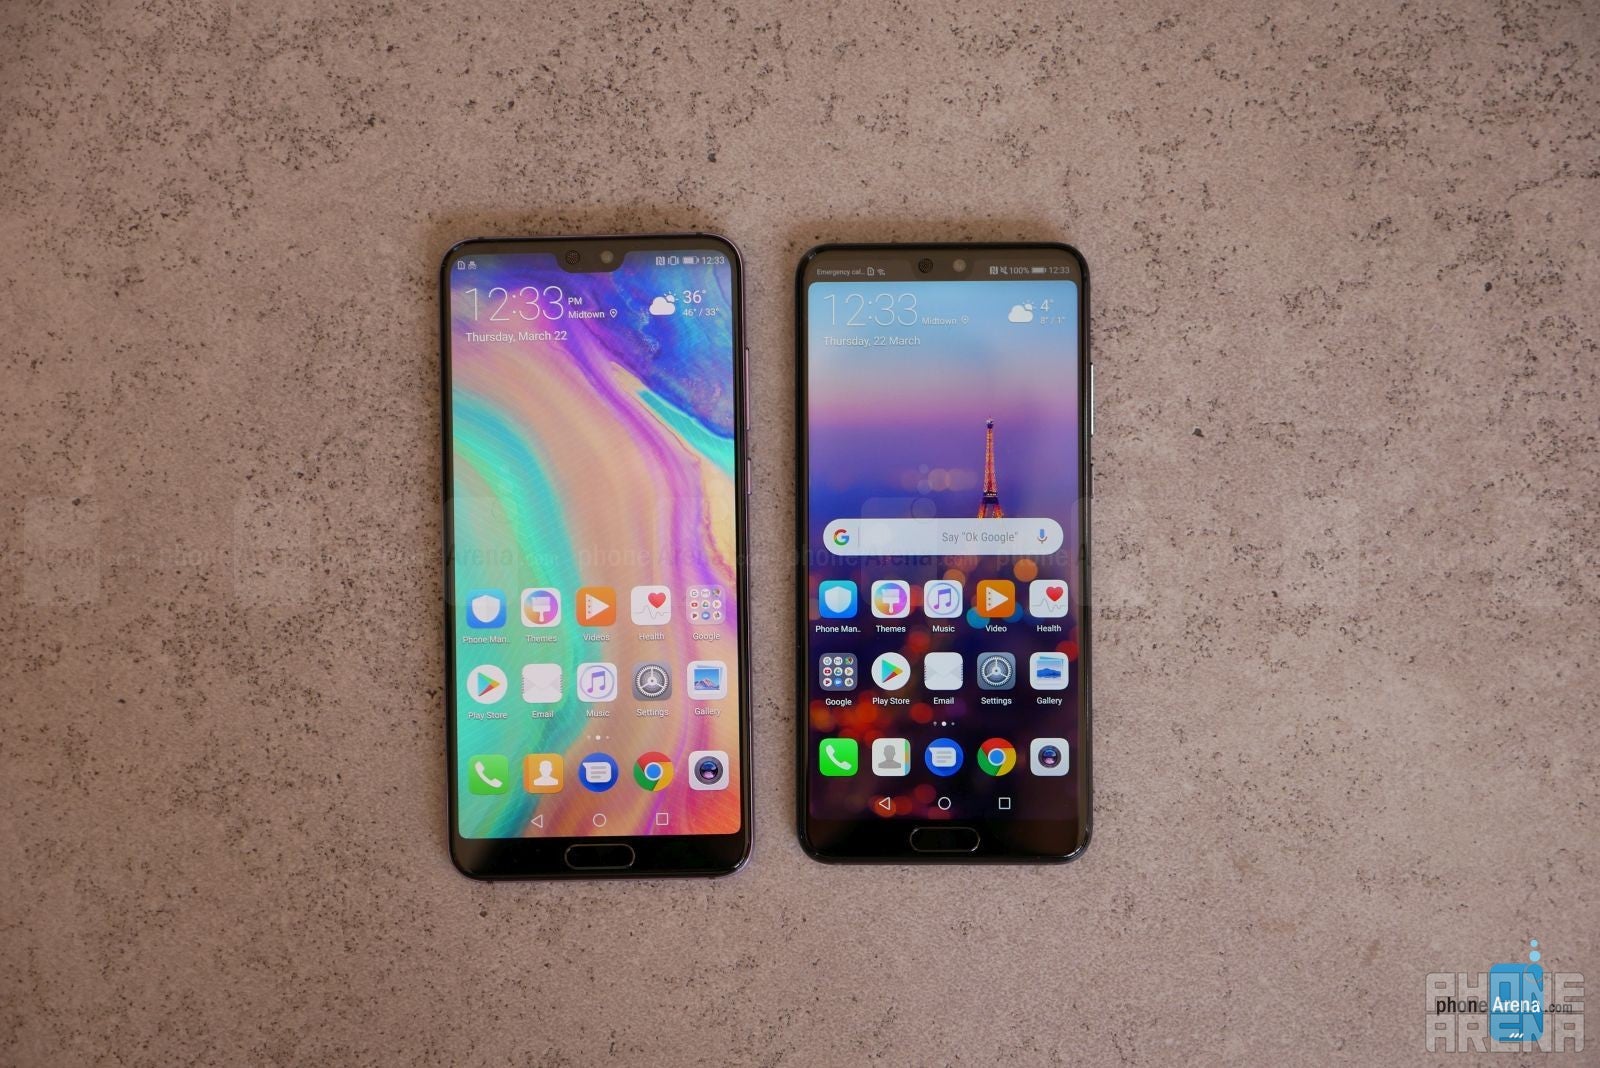 Huawei P20 and P20 Pro hands-on: Lust-worthy contenders with serious cameras